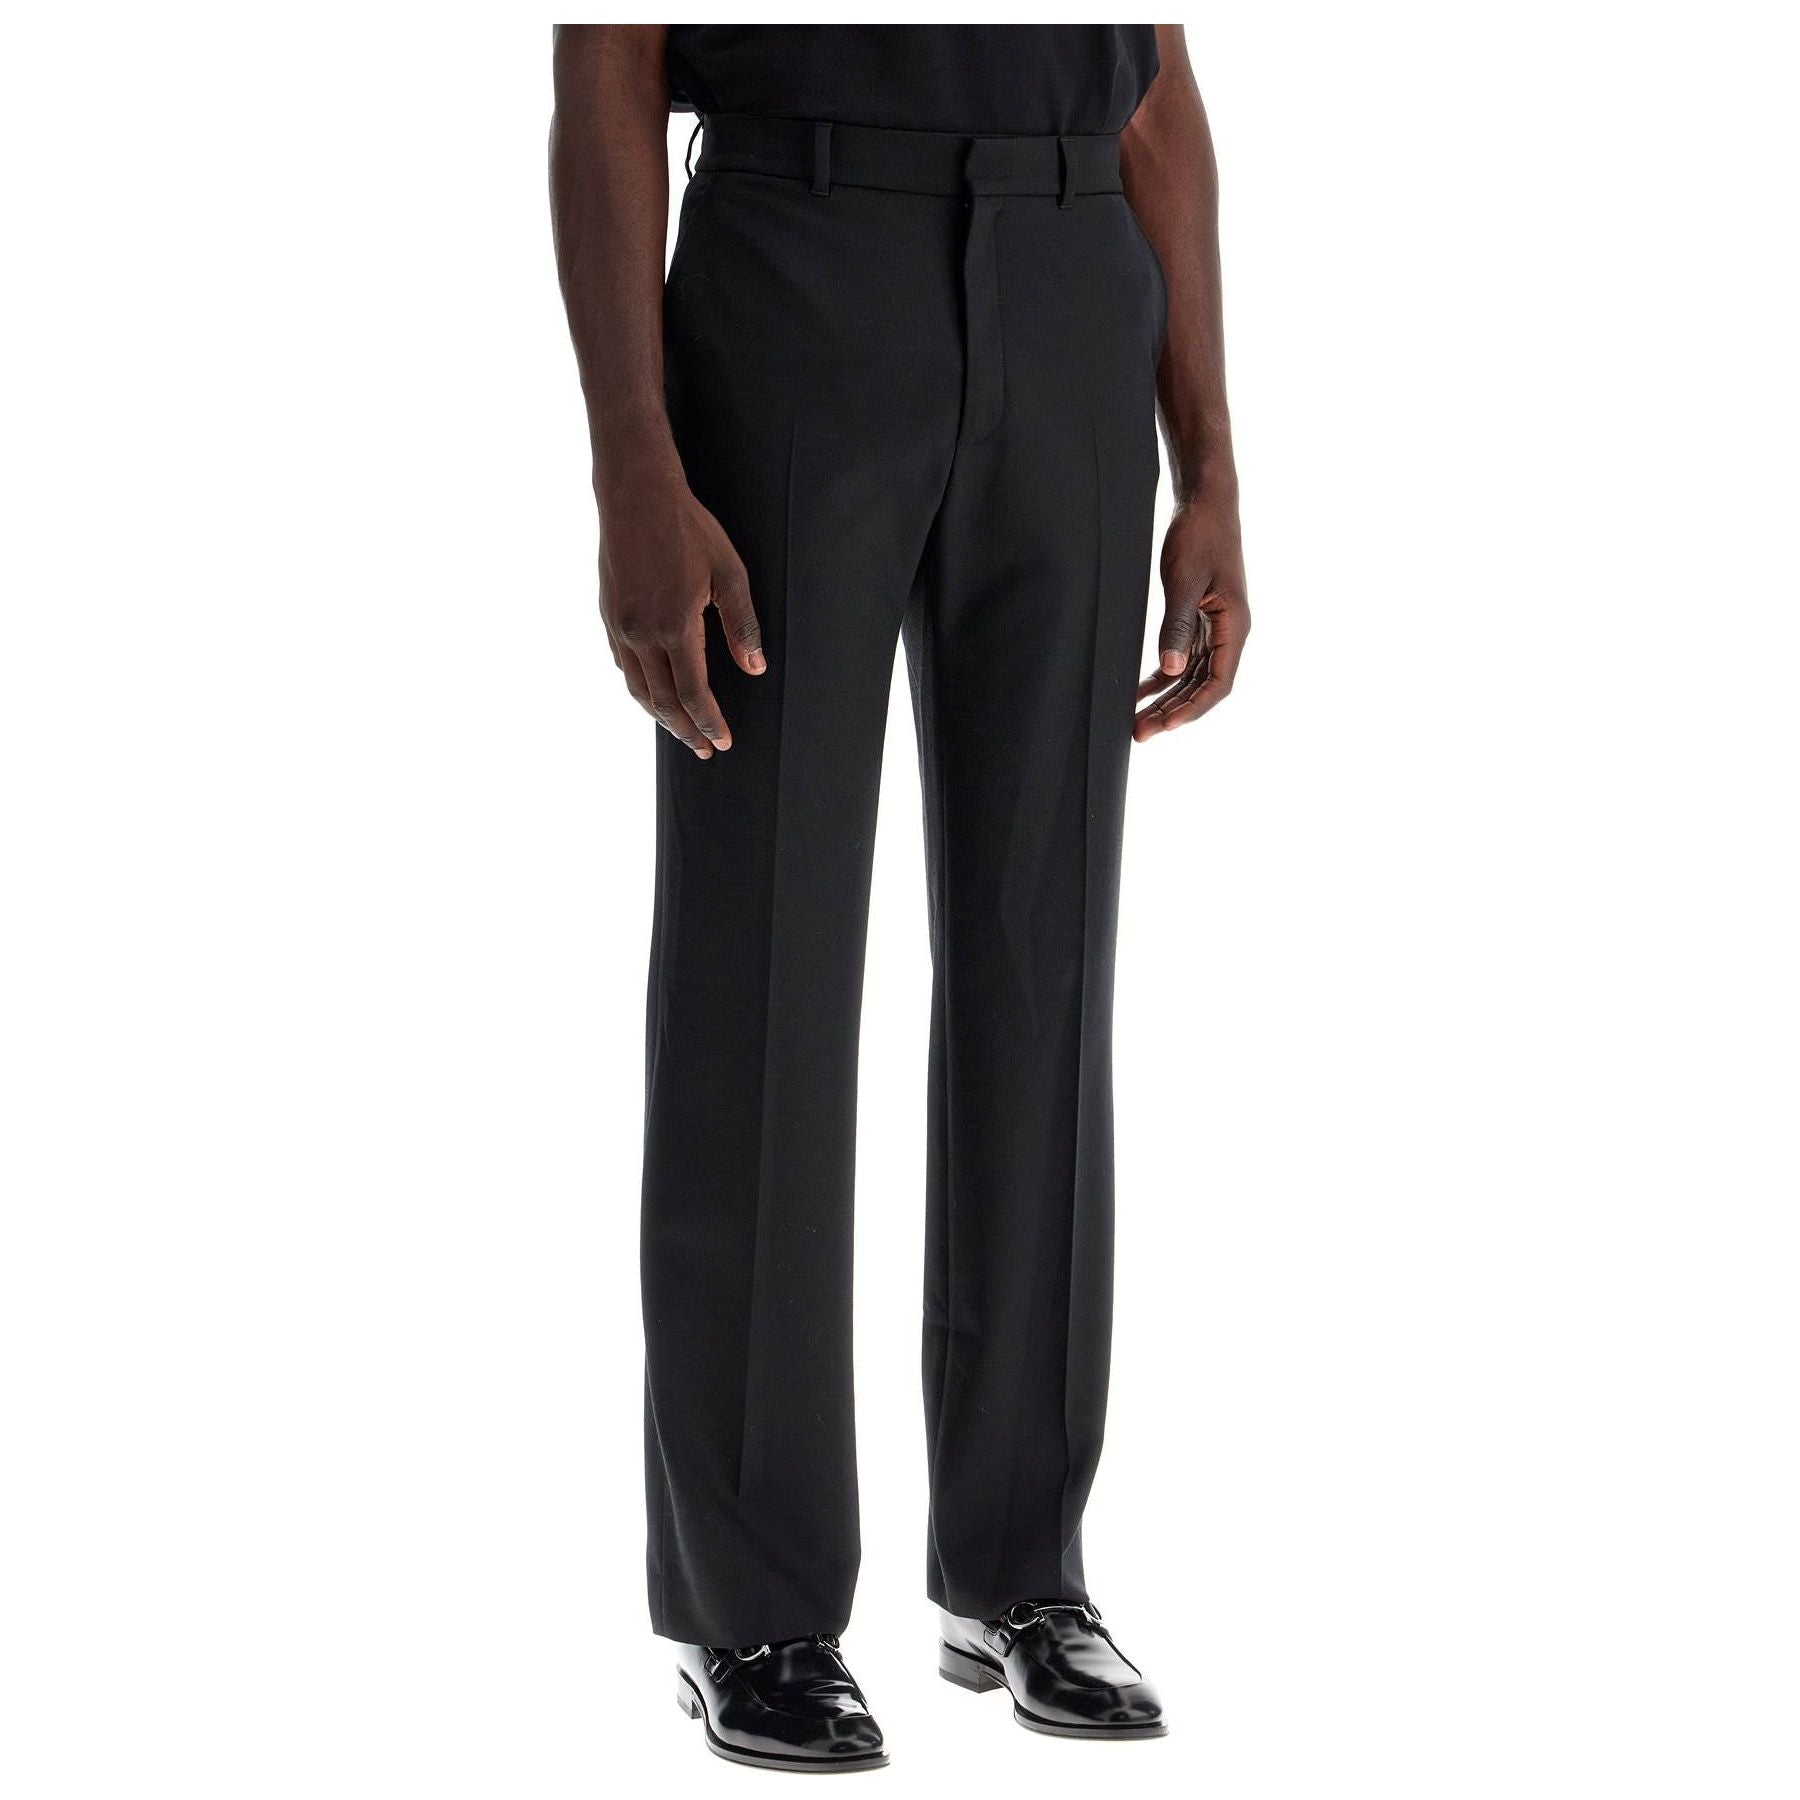 Tailored Slim Fit Trousers